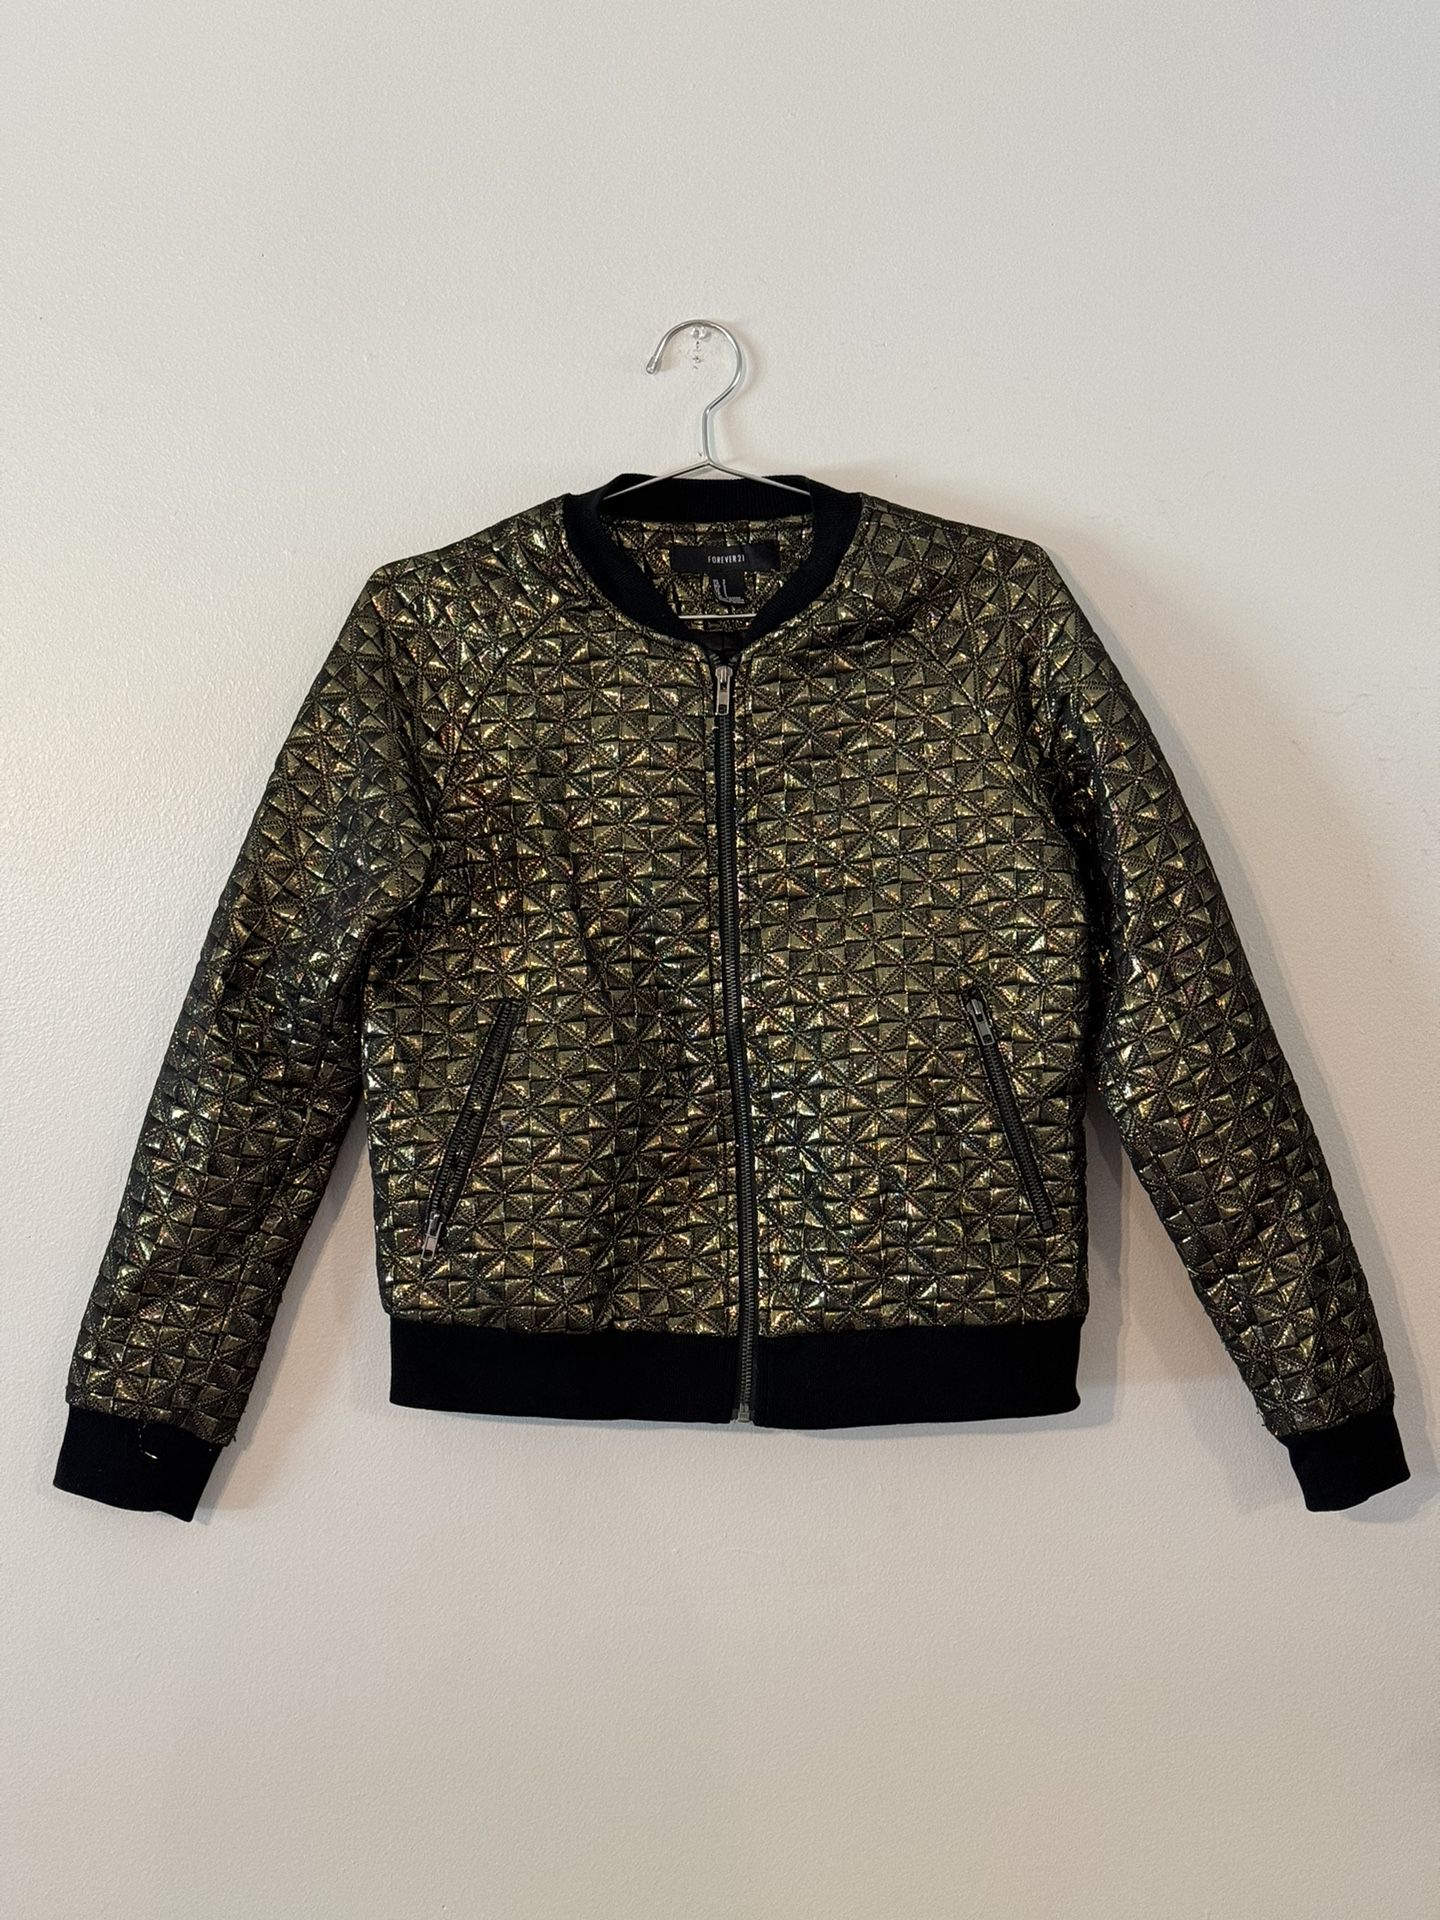 FOREVER 21 Metallic Gold Quilted Bomber Jacket Size Small